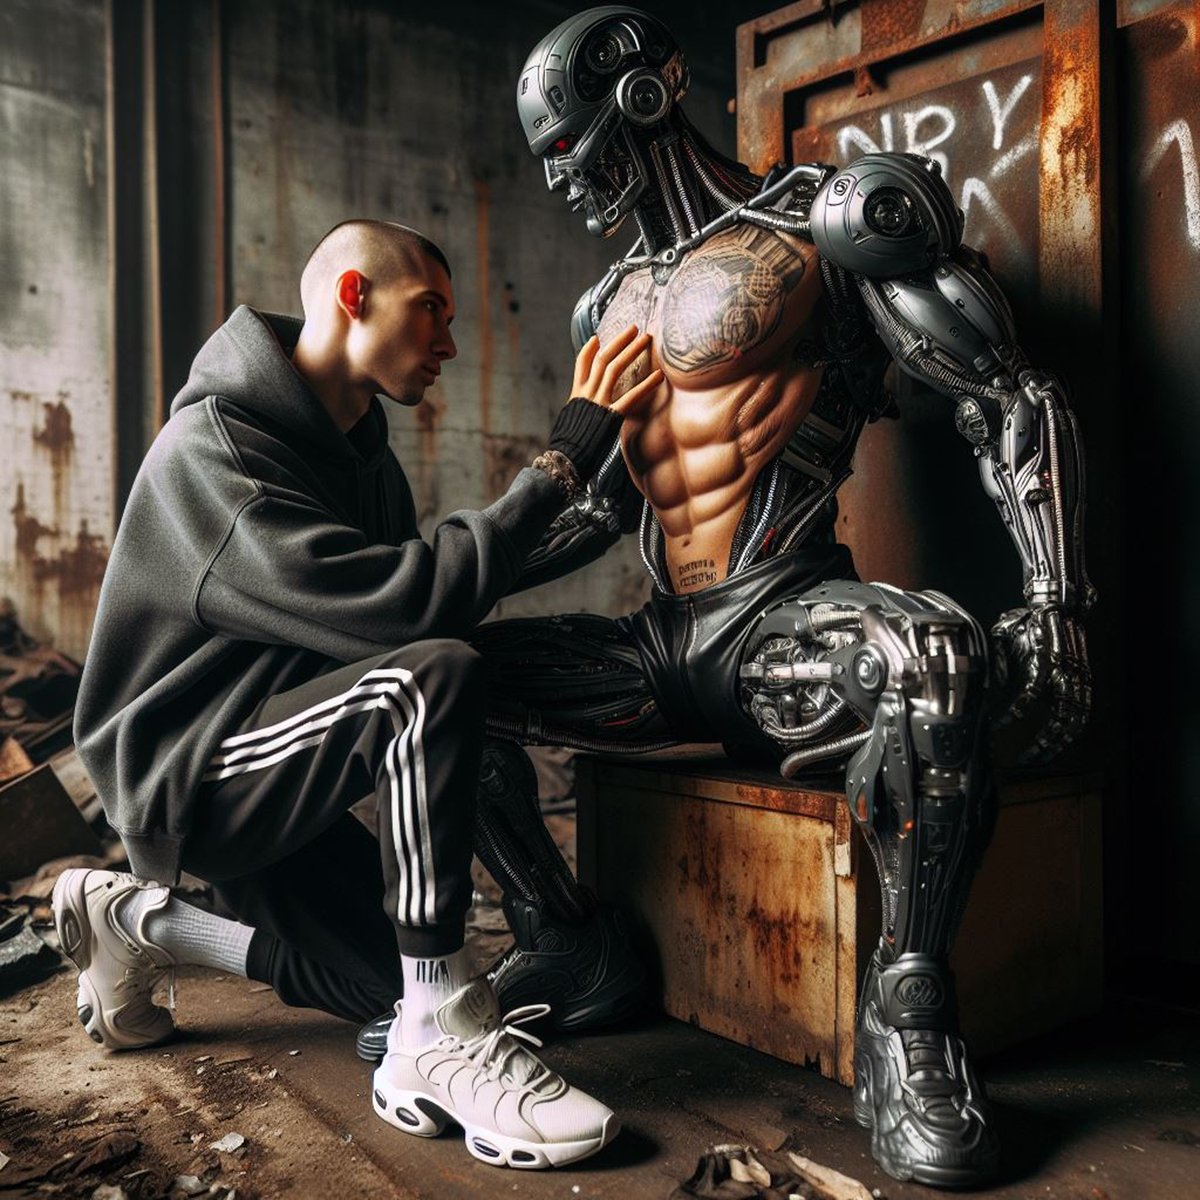 Getting intimate with the cyborg.

@cyberhoodboy #cyborg #cyborgs #robot #robots #androids #tracksuits #tracksuitfetish #scally #gayscally